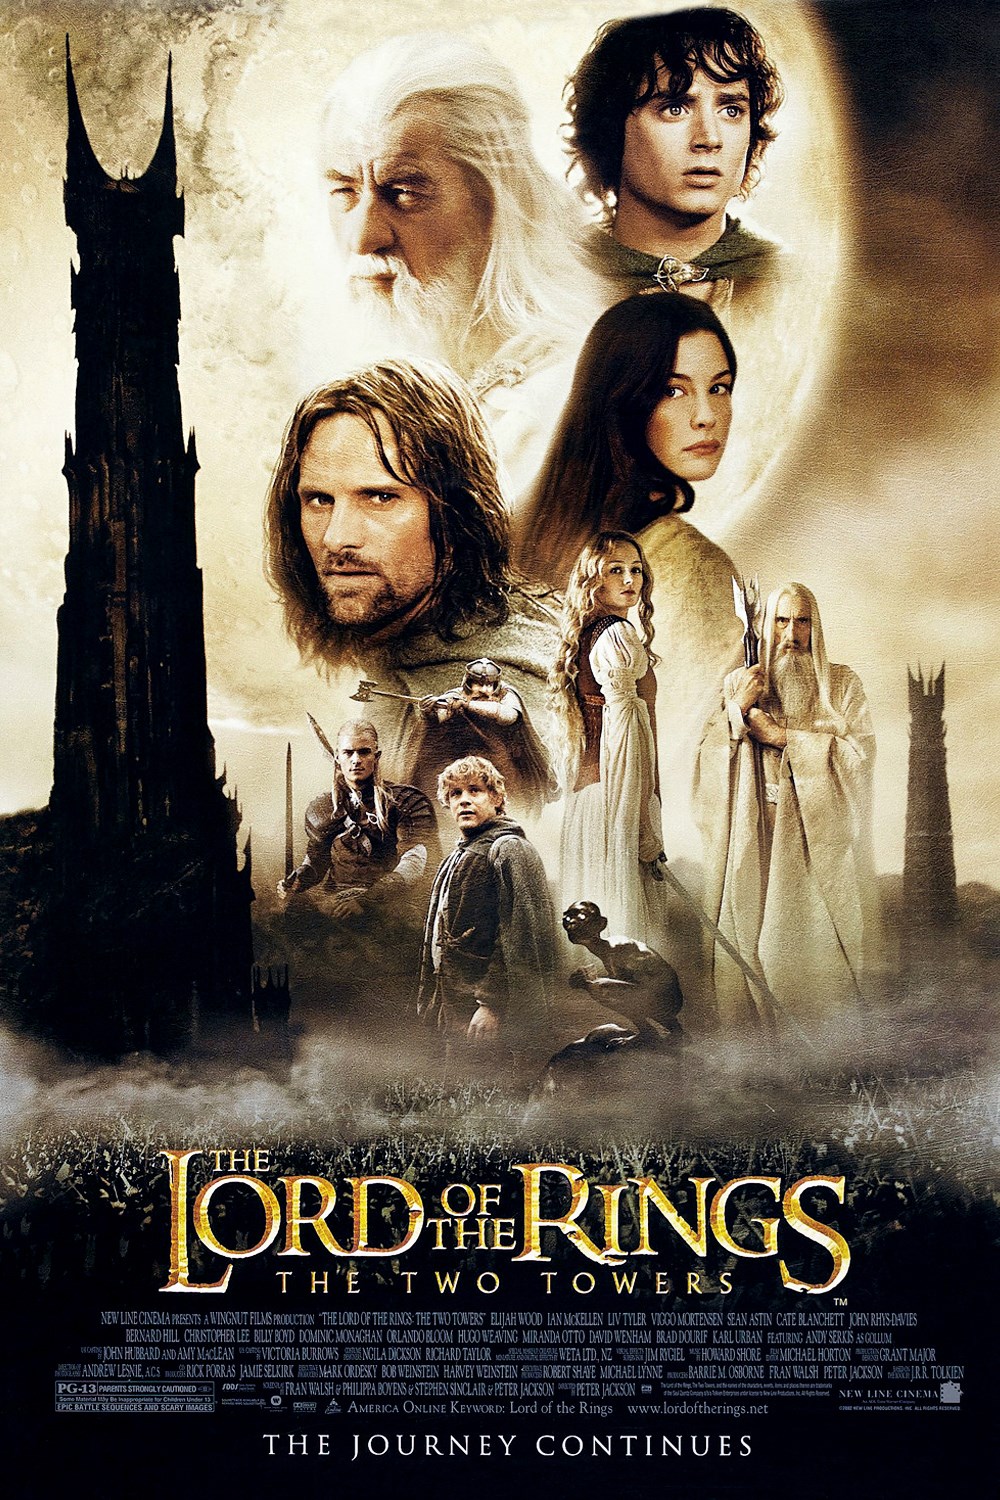 The lord of the rings: the two towers (2002)